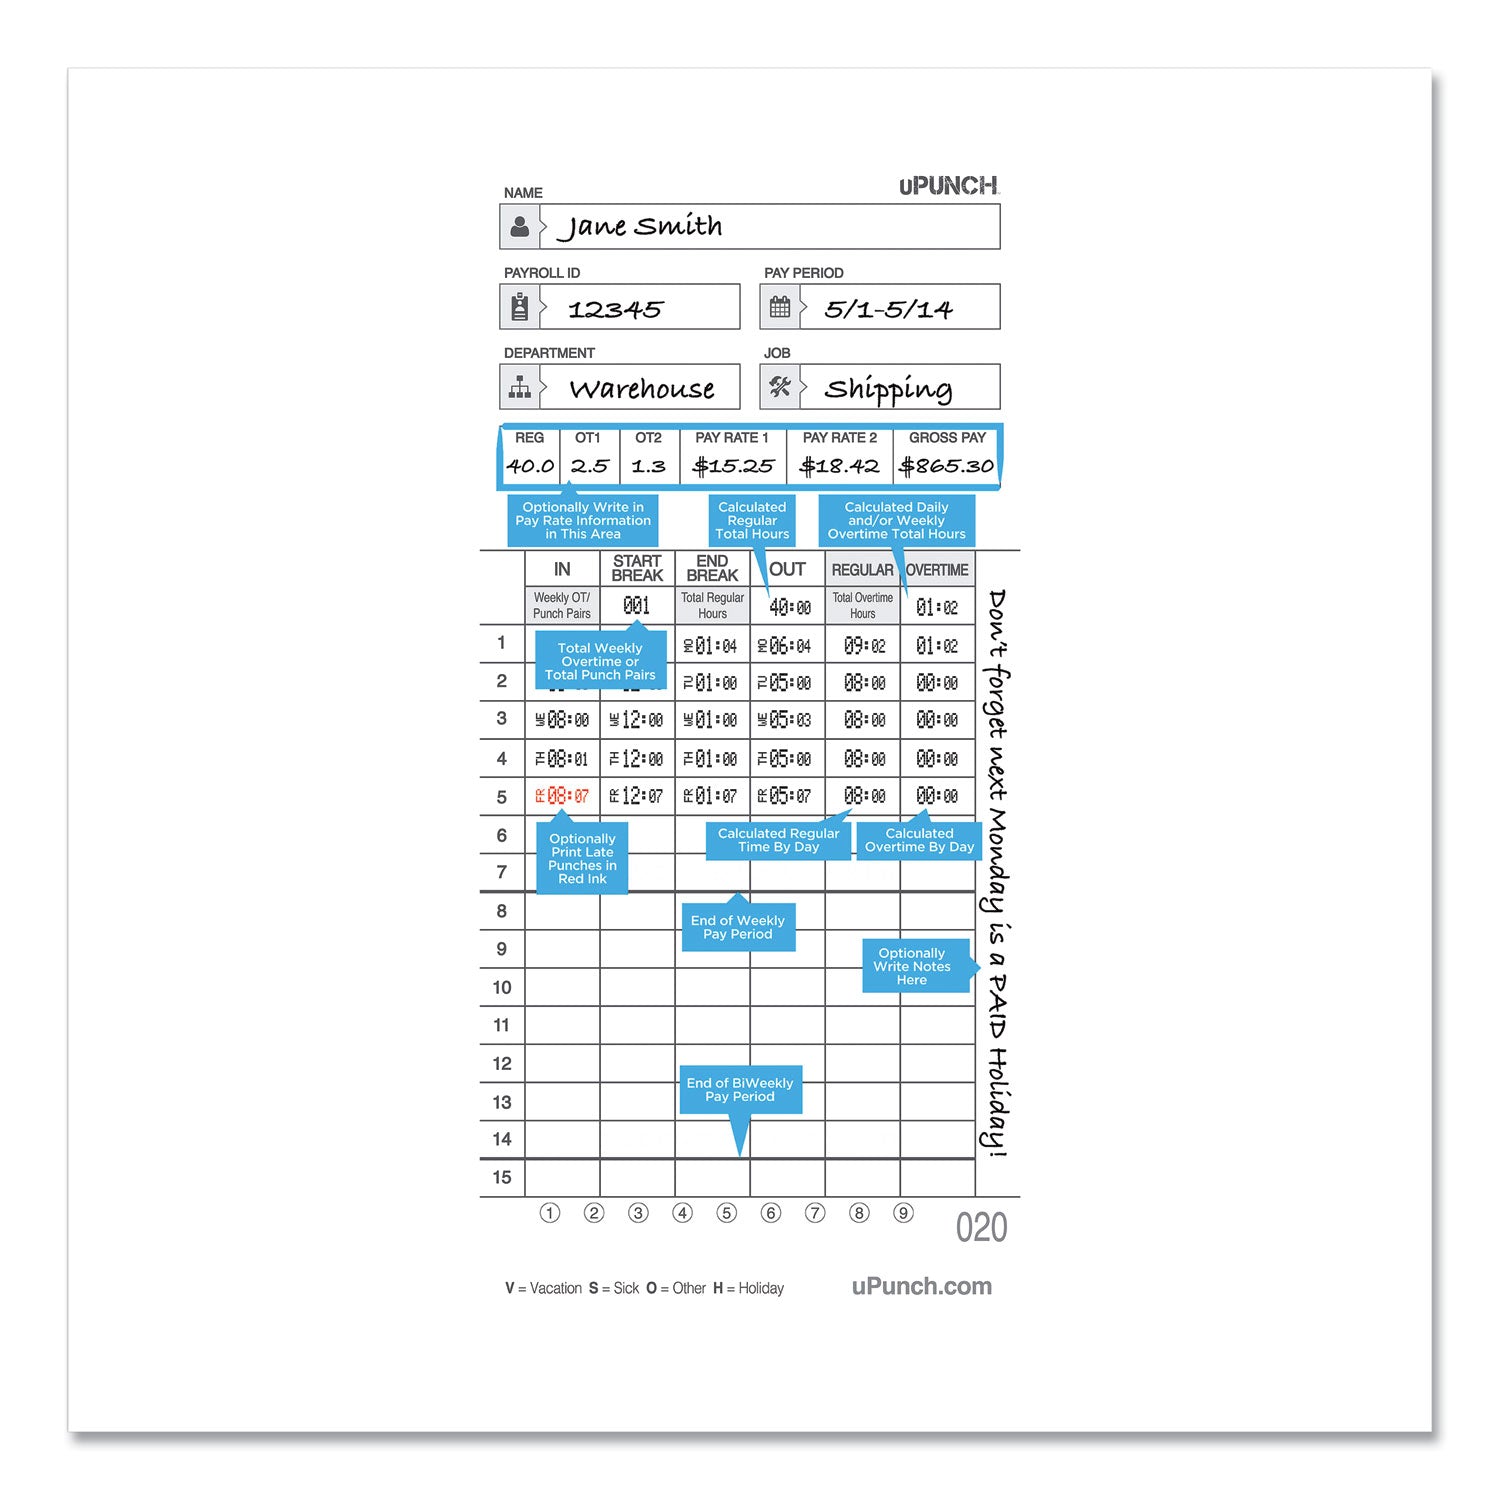 time-clock-cards-for-upunch-hn4000-two-sides-737-x-337-50-pack_ppzhntcl2050 - 2